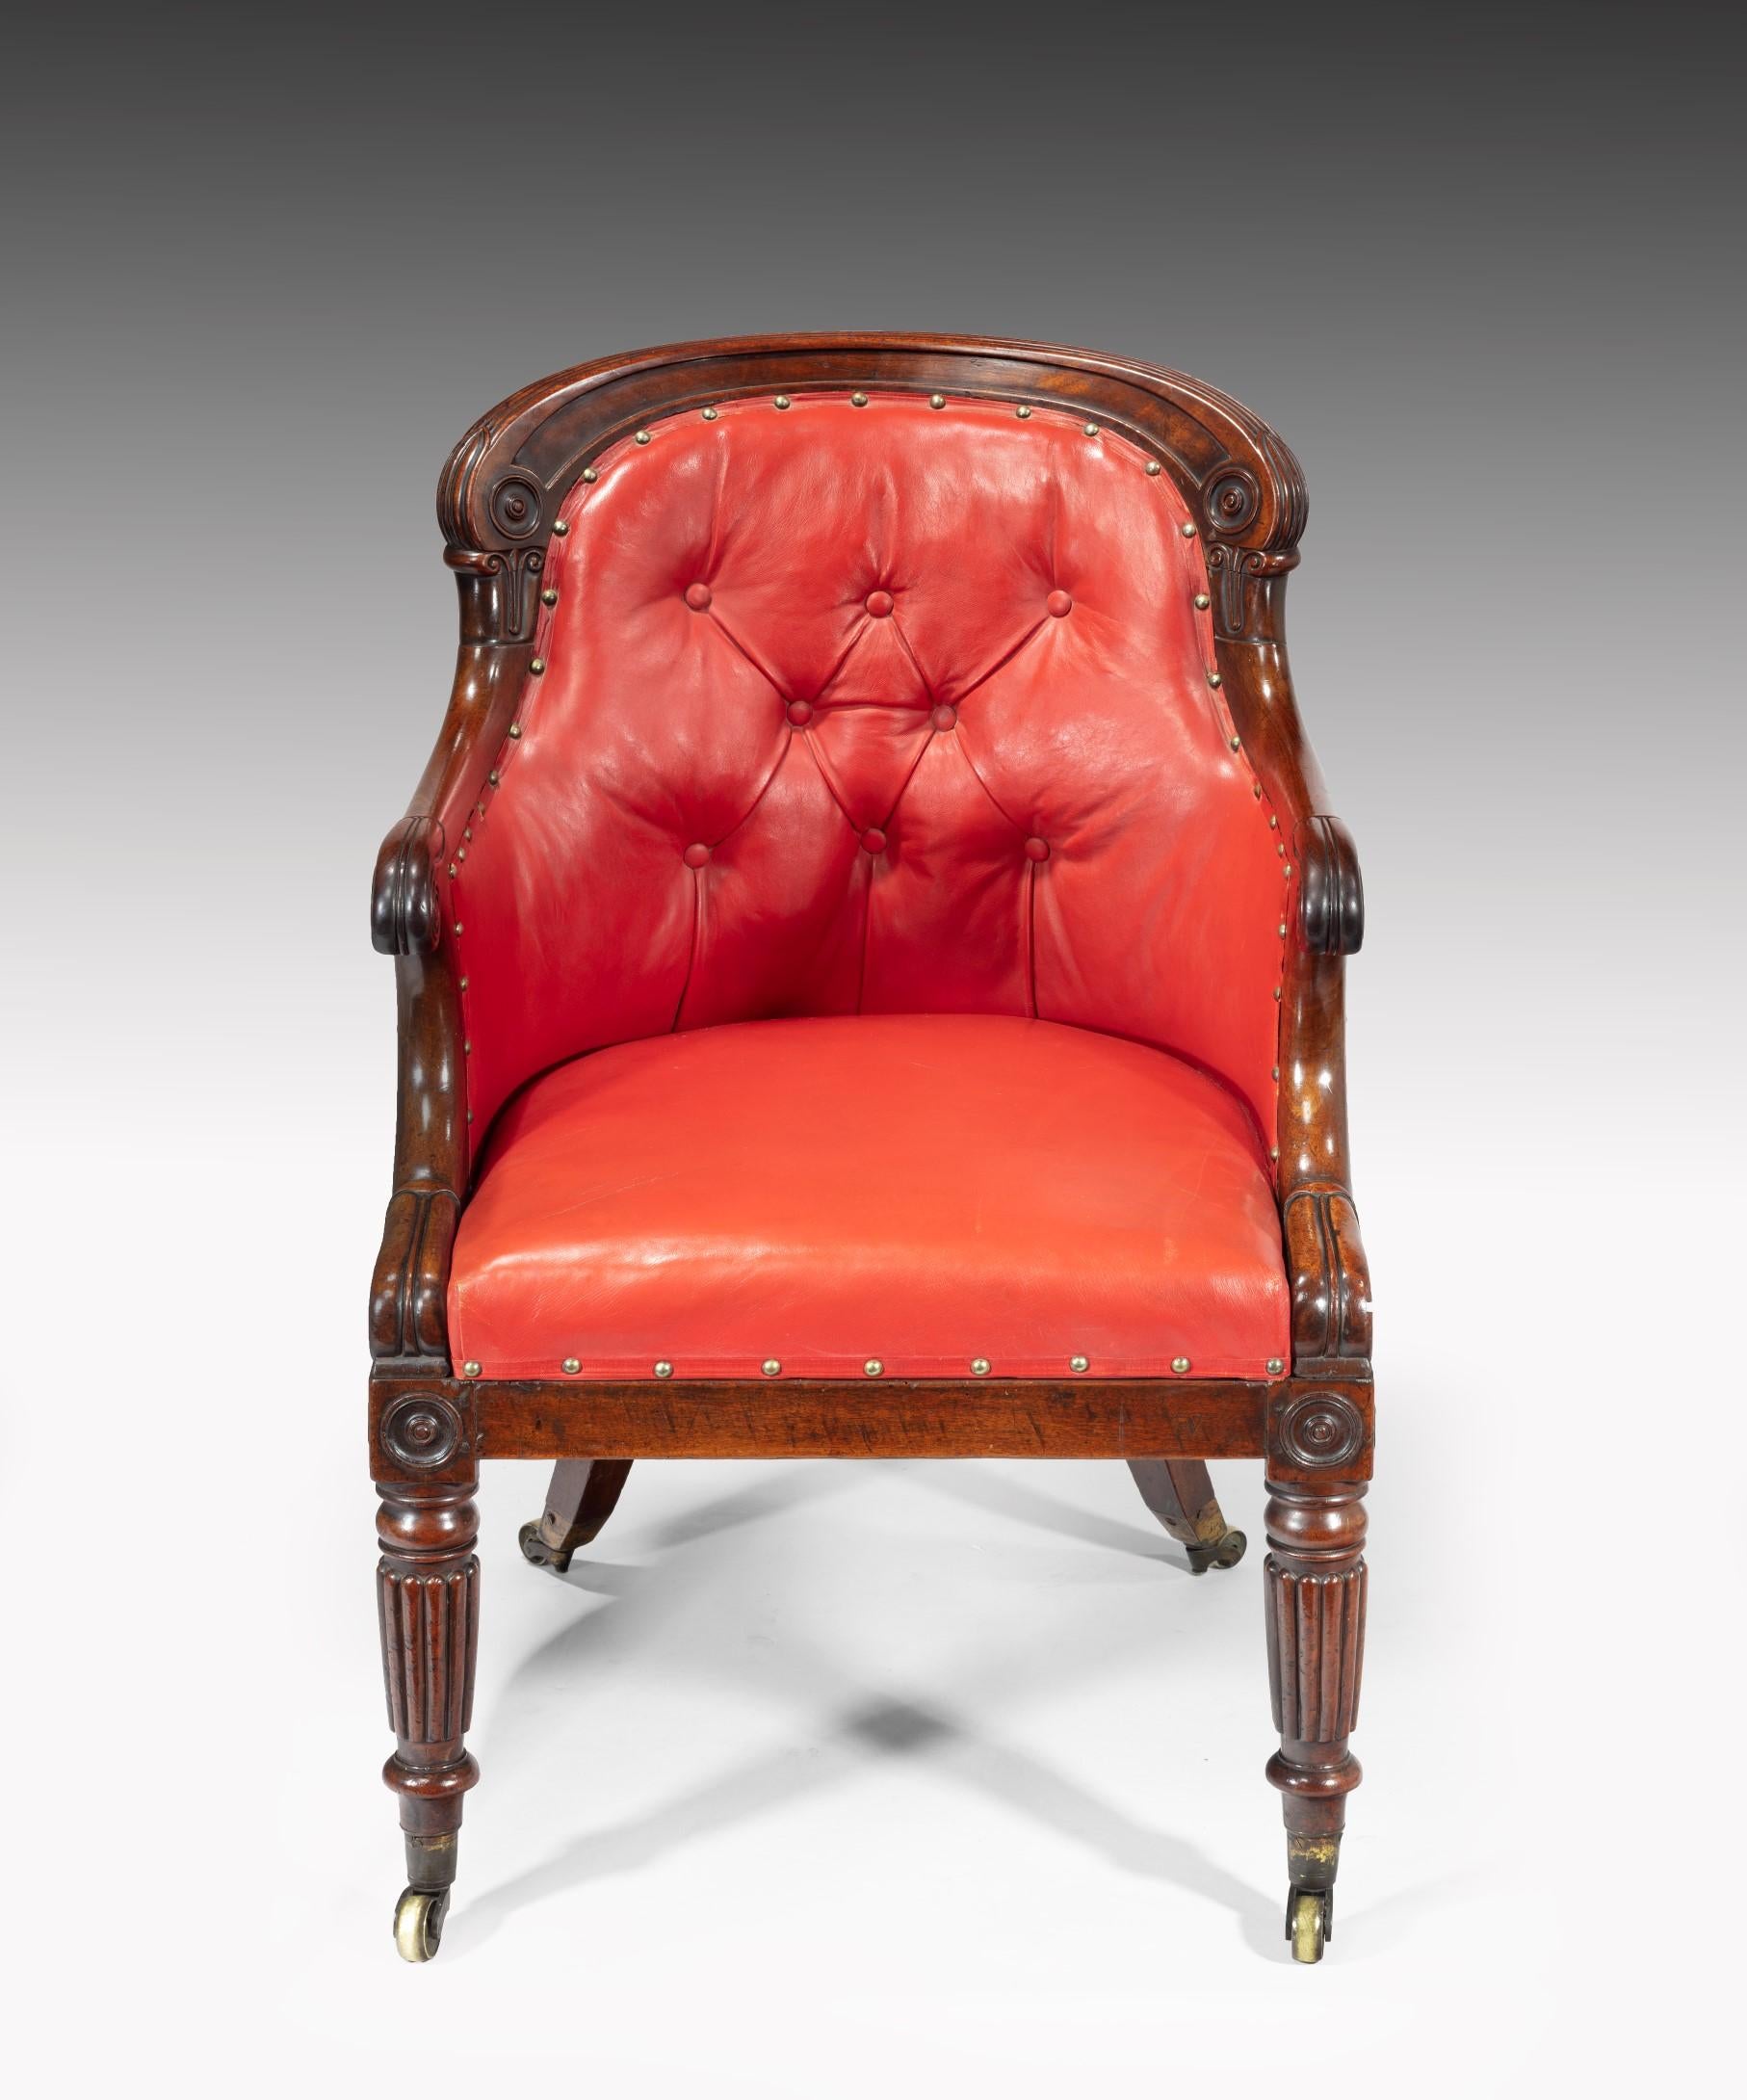 Carved 19th Century Regency Mahogany Desk Armchair For Sale